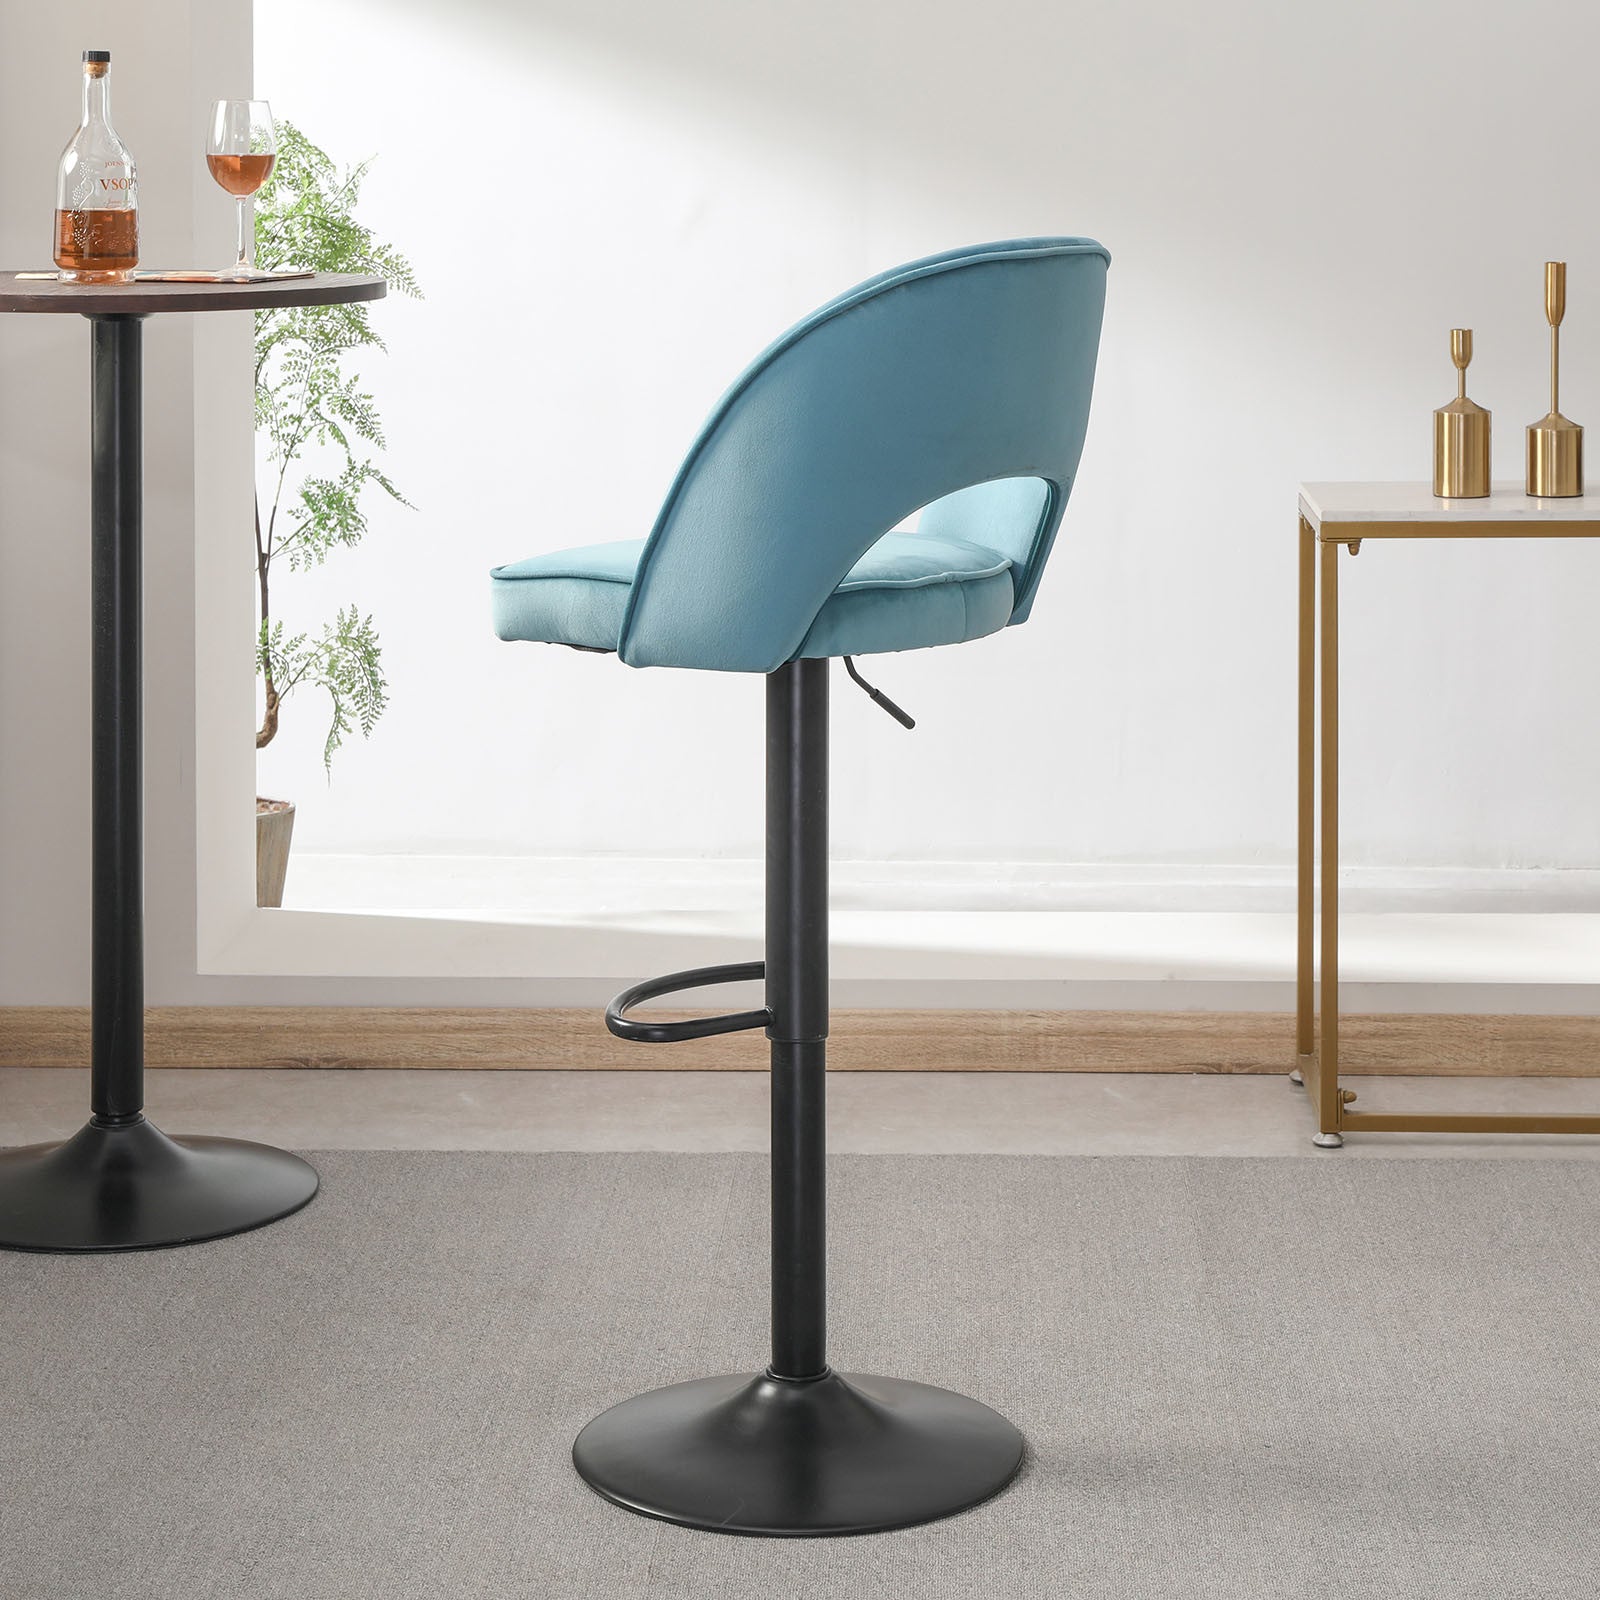 Modern Bar Stool with a curved backrest and an adjustable height black pedestal base, isolated on a white background.